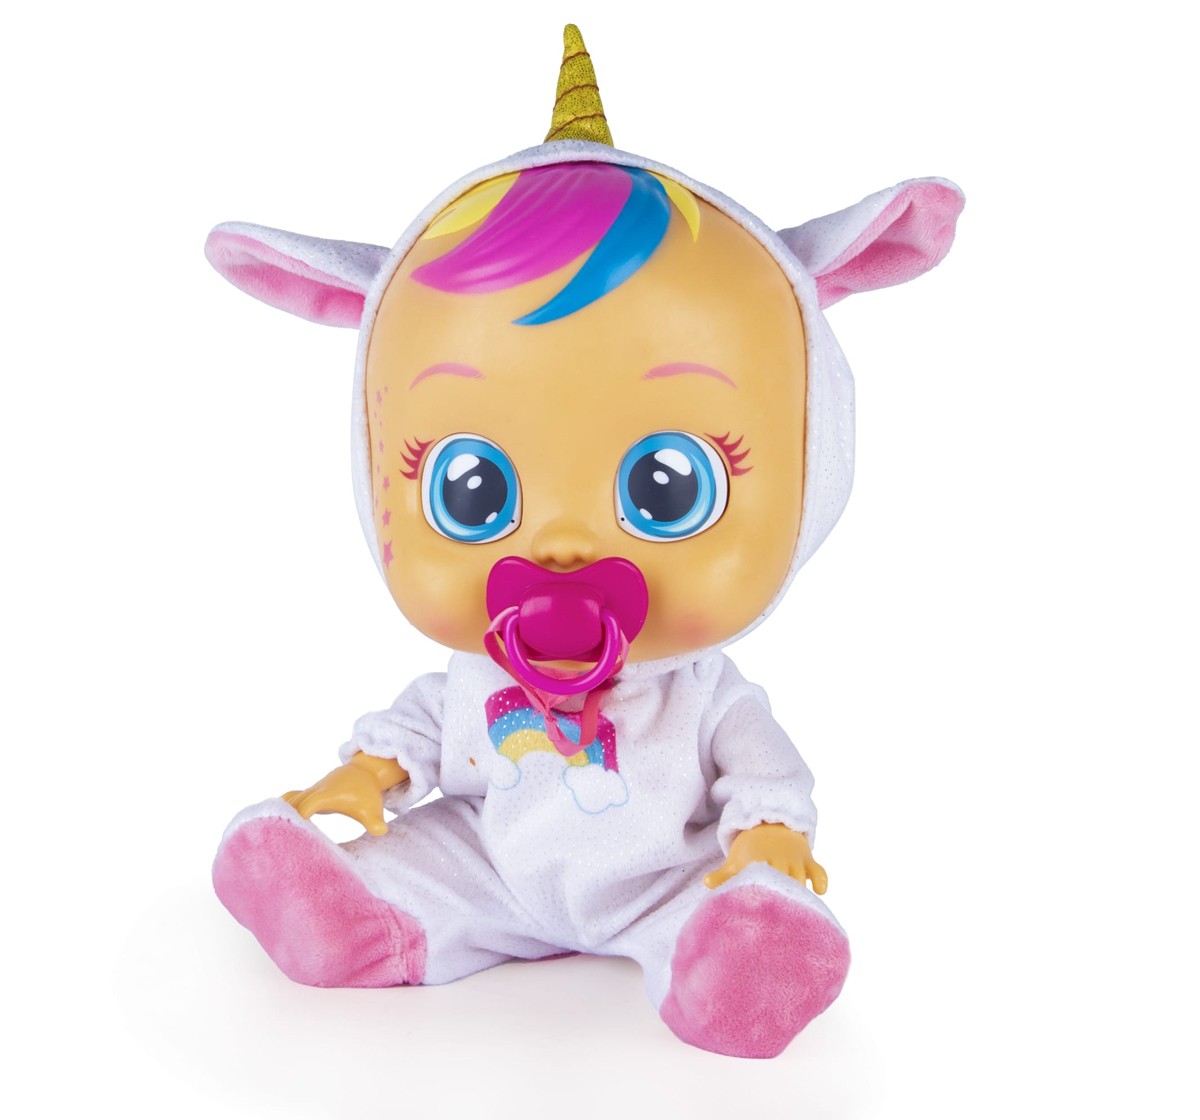 Cry Babies Dreamy Dolls For Kids, 18M+